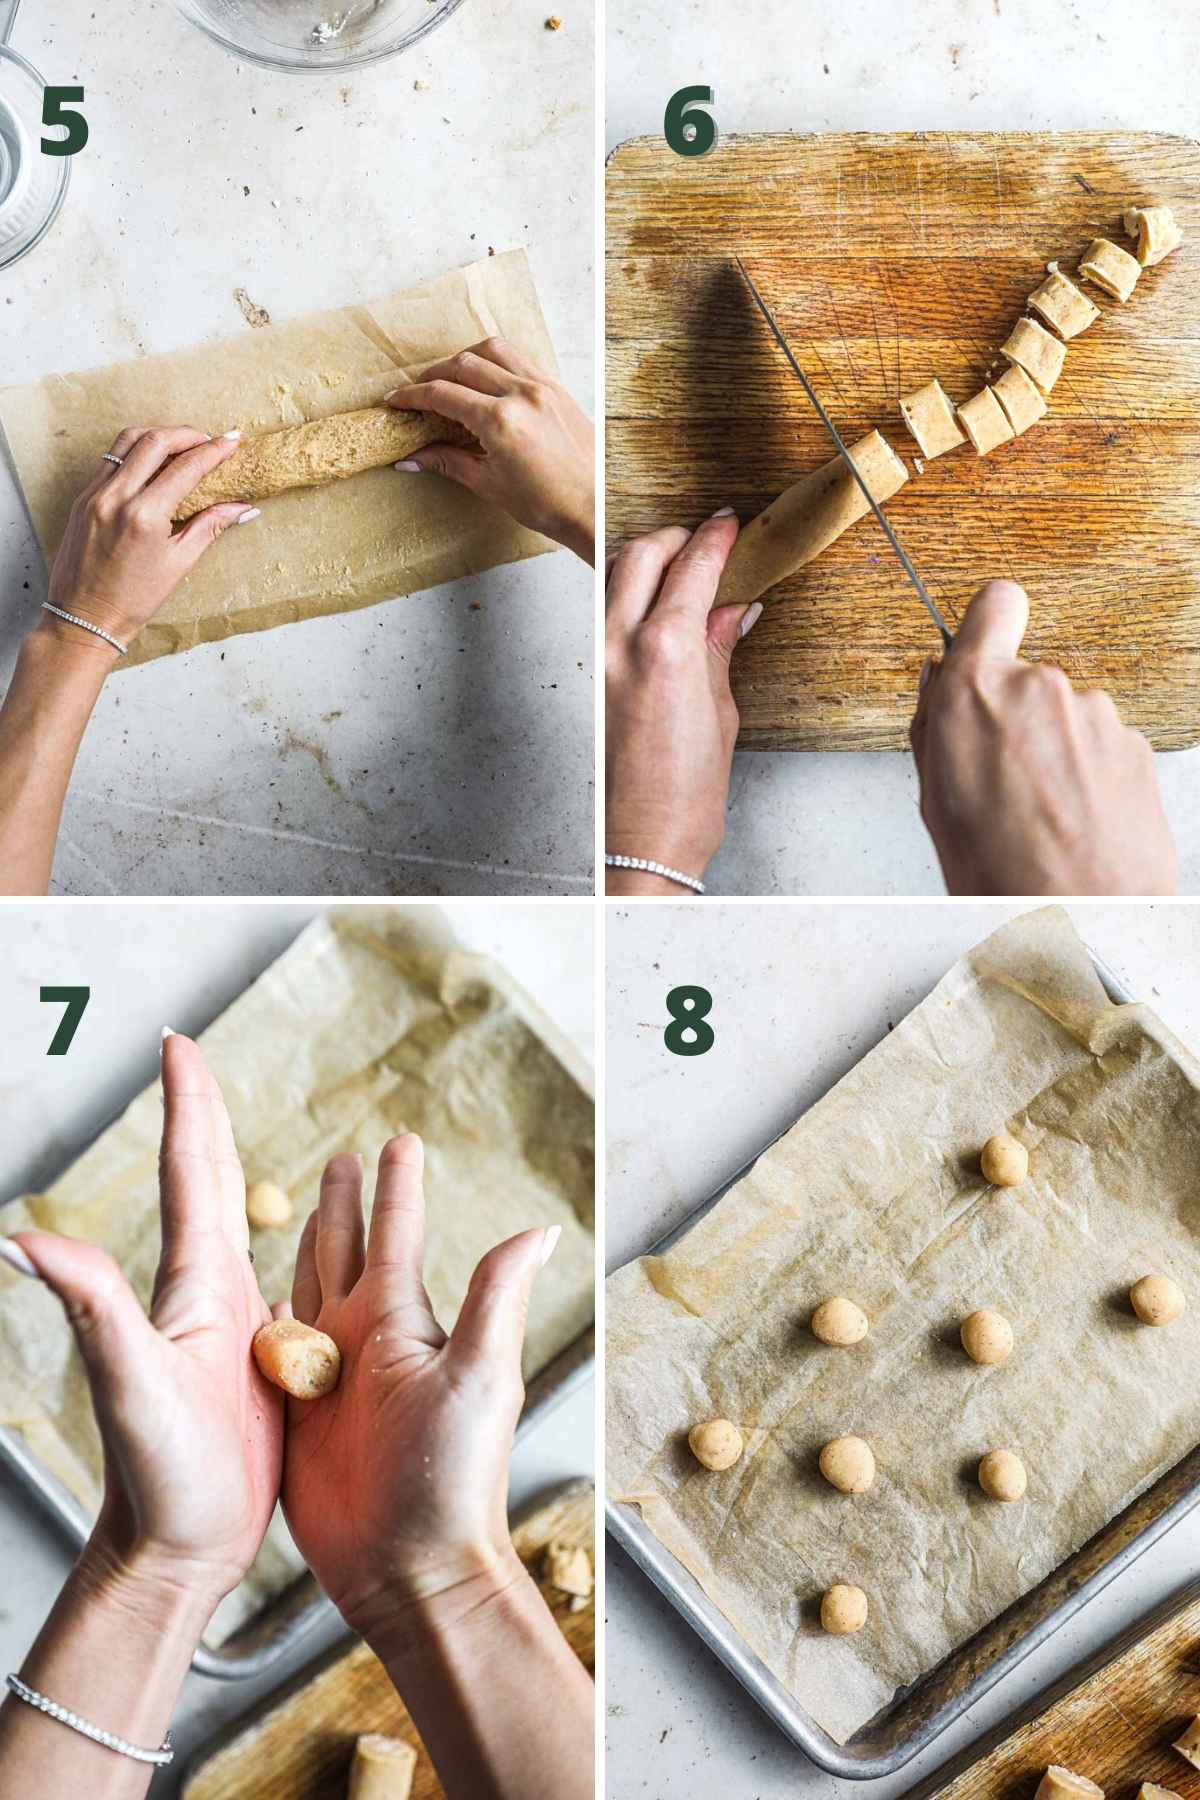 Steps to make baci di dama, including rolling out the dough, freezing the dough, cutting it into small pieces, rolling the dough into balls, and placing them on a baking sheet.